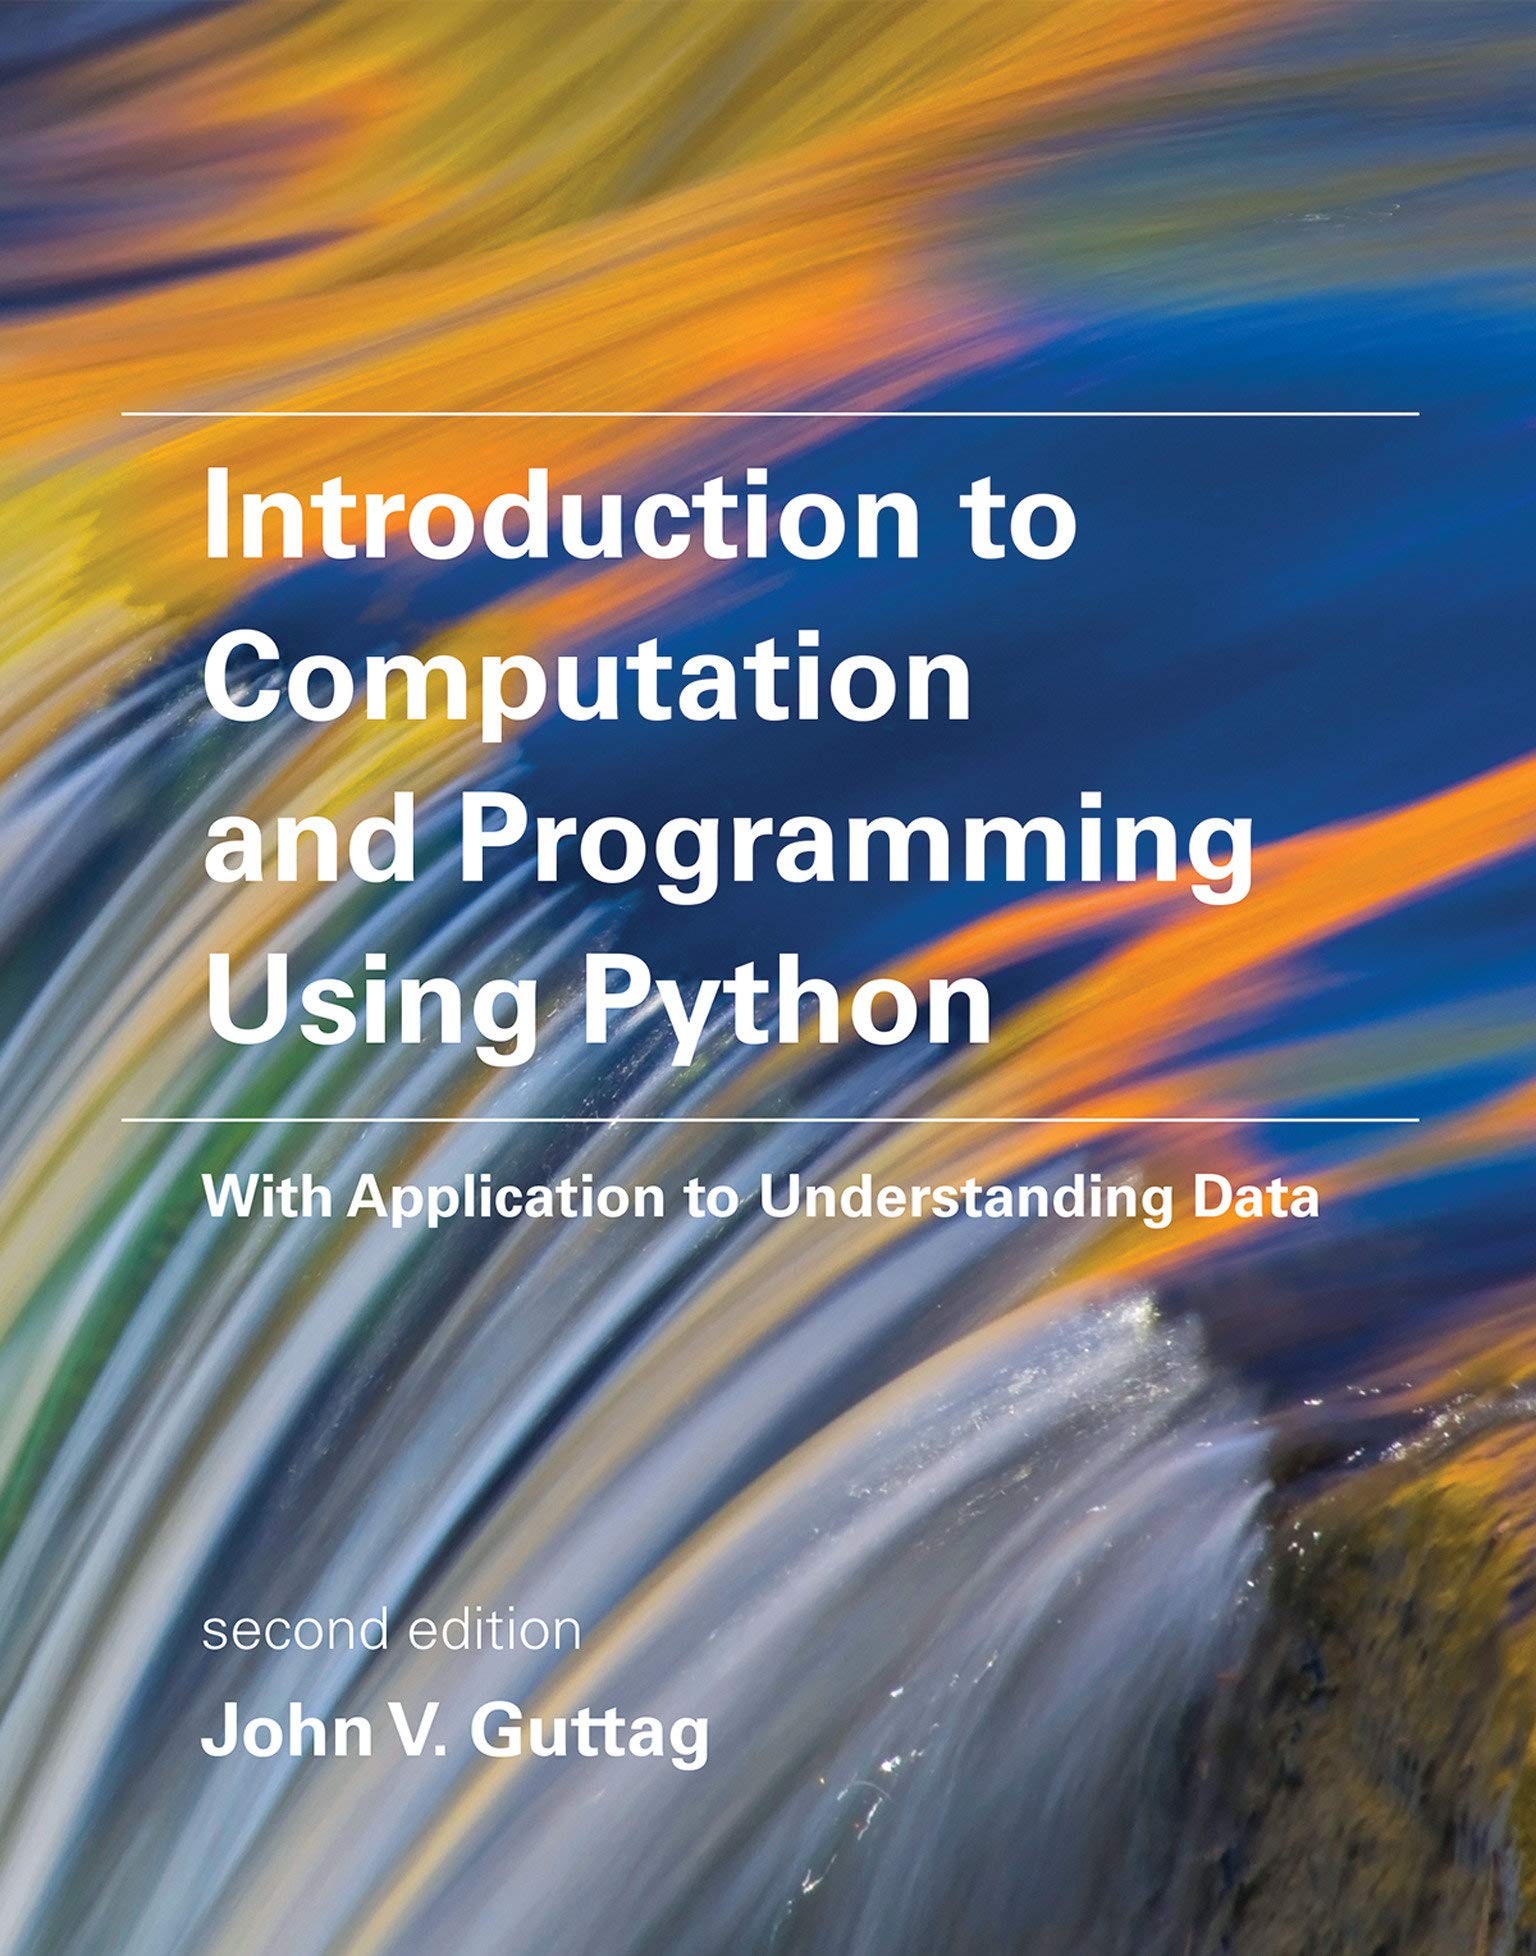 Introduction to Computation and Programming Using Python, Second Edition: With Application to Understanding Data